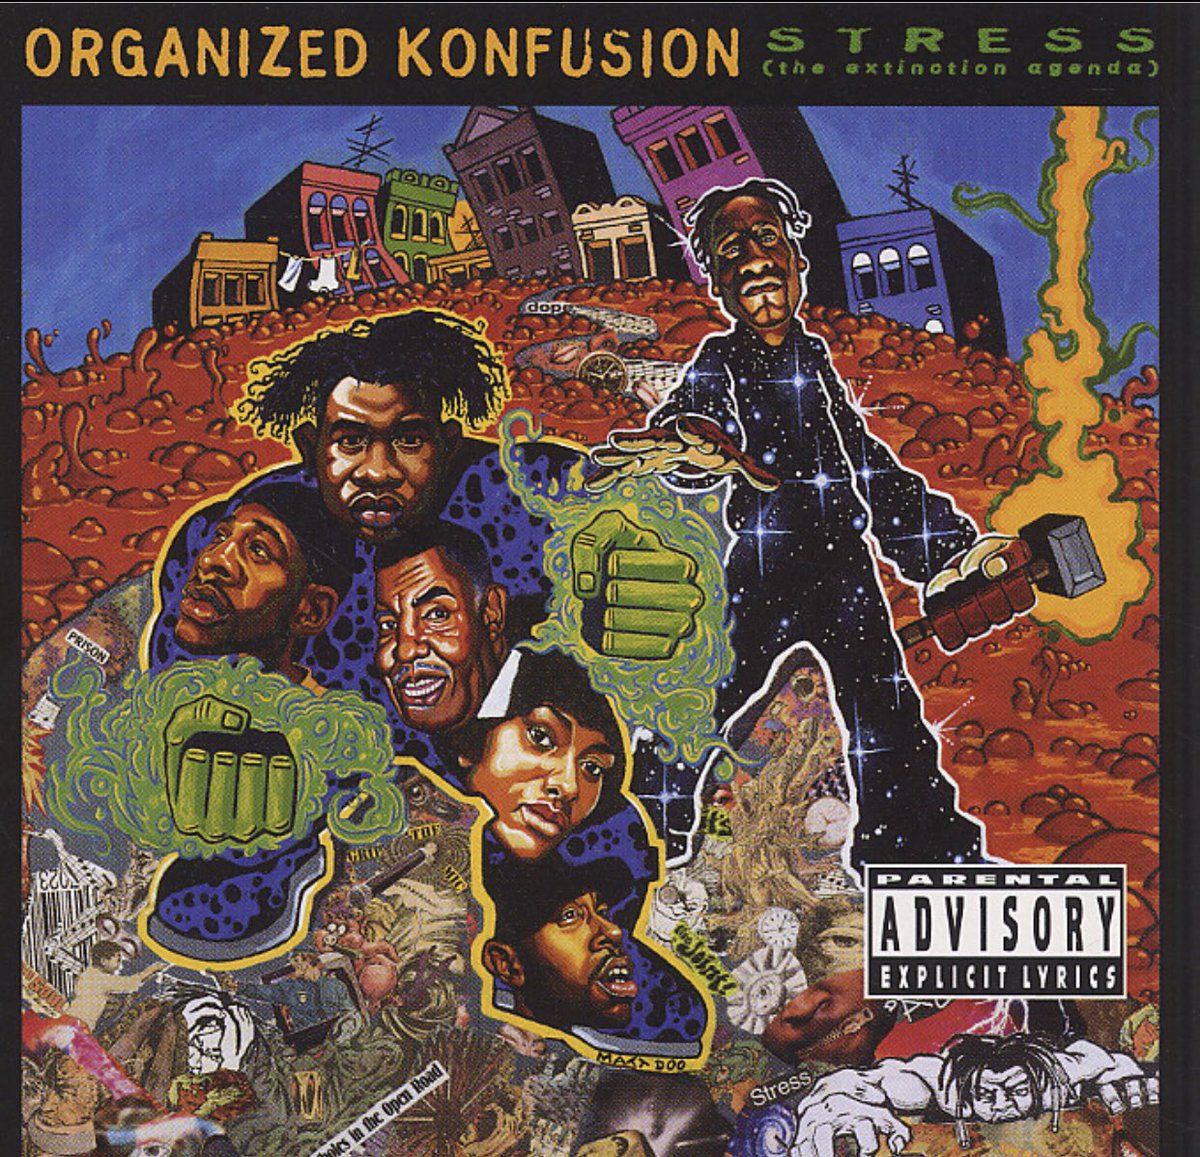 Released Today 1994 #OrganizedKonfusion #StressTheExtinctionAgenda #hiphop #music #life #love #culture #goldenera #classic #hiphopartist #producers #beats #blog #hiphopblog #pictures #history #westcoast #eastcoast #worldwide #influencer #art #tattoos #movies